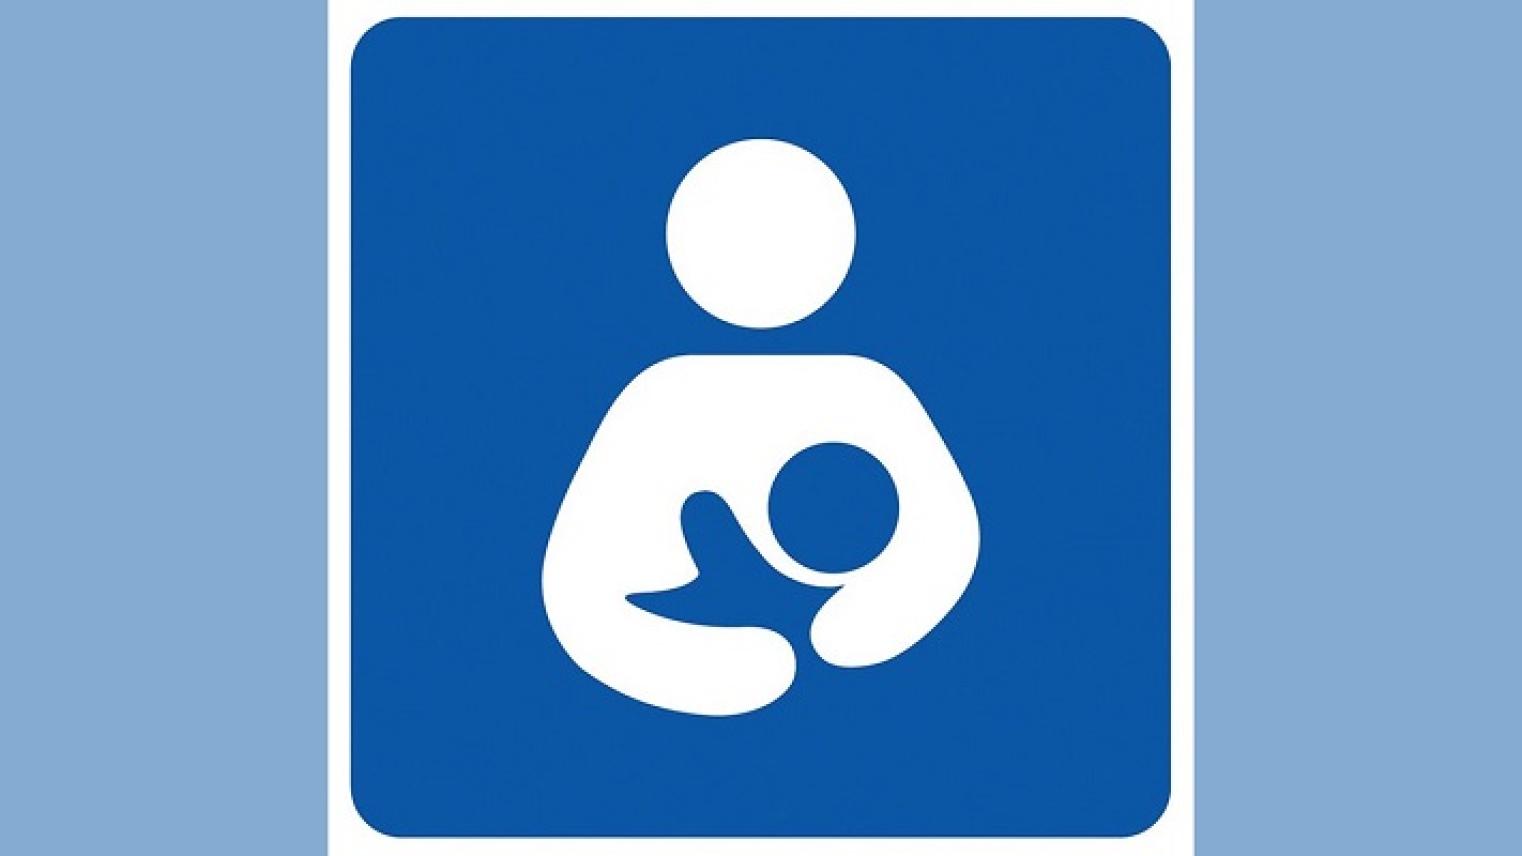 International Breastfeeding symbol from https://flic.kr/p/sP2xA by Rob https://www.flickr.com/photos/topinambour/, used under CC BY-NC-ND 2.0 licence 